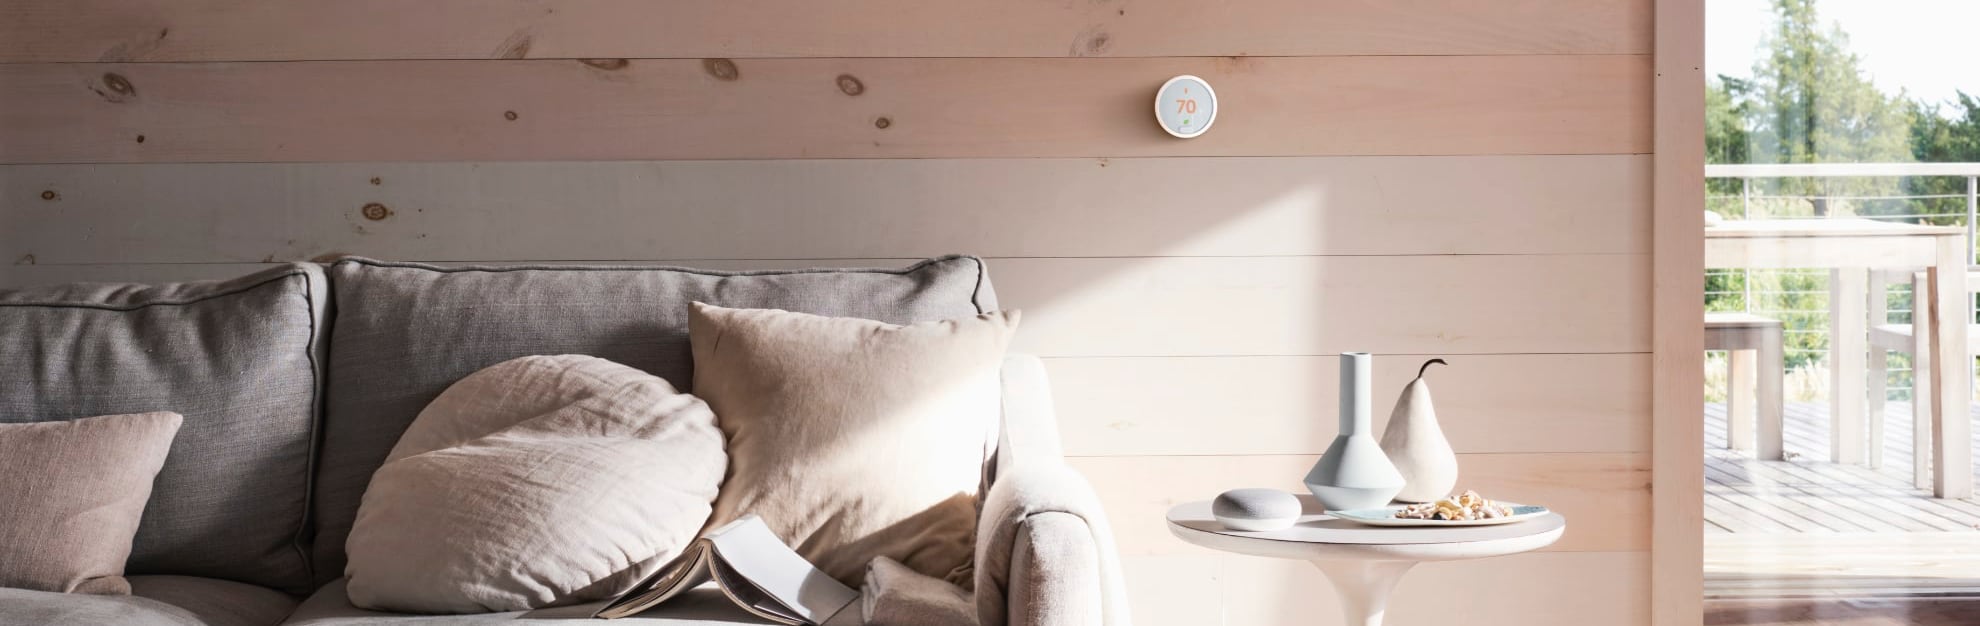 Vivint Home Automation in Rochester